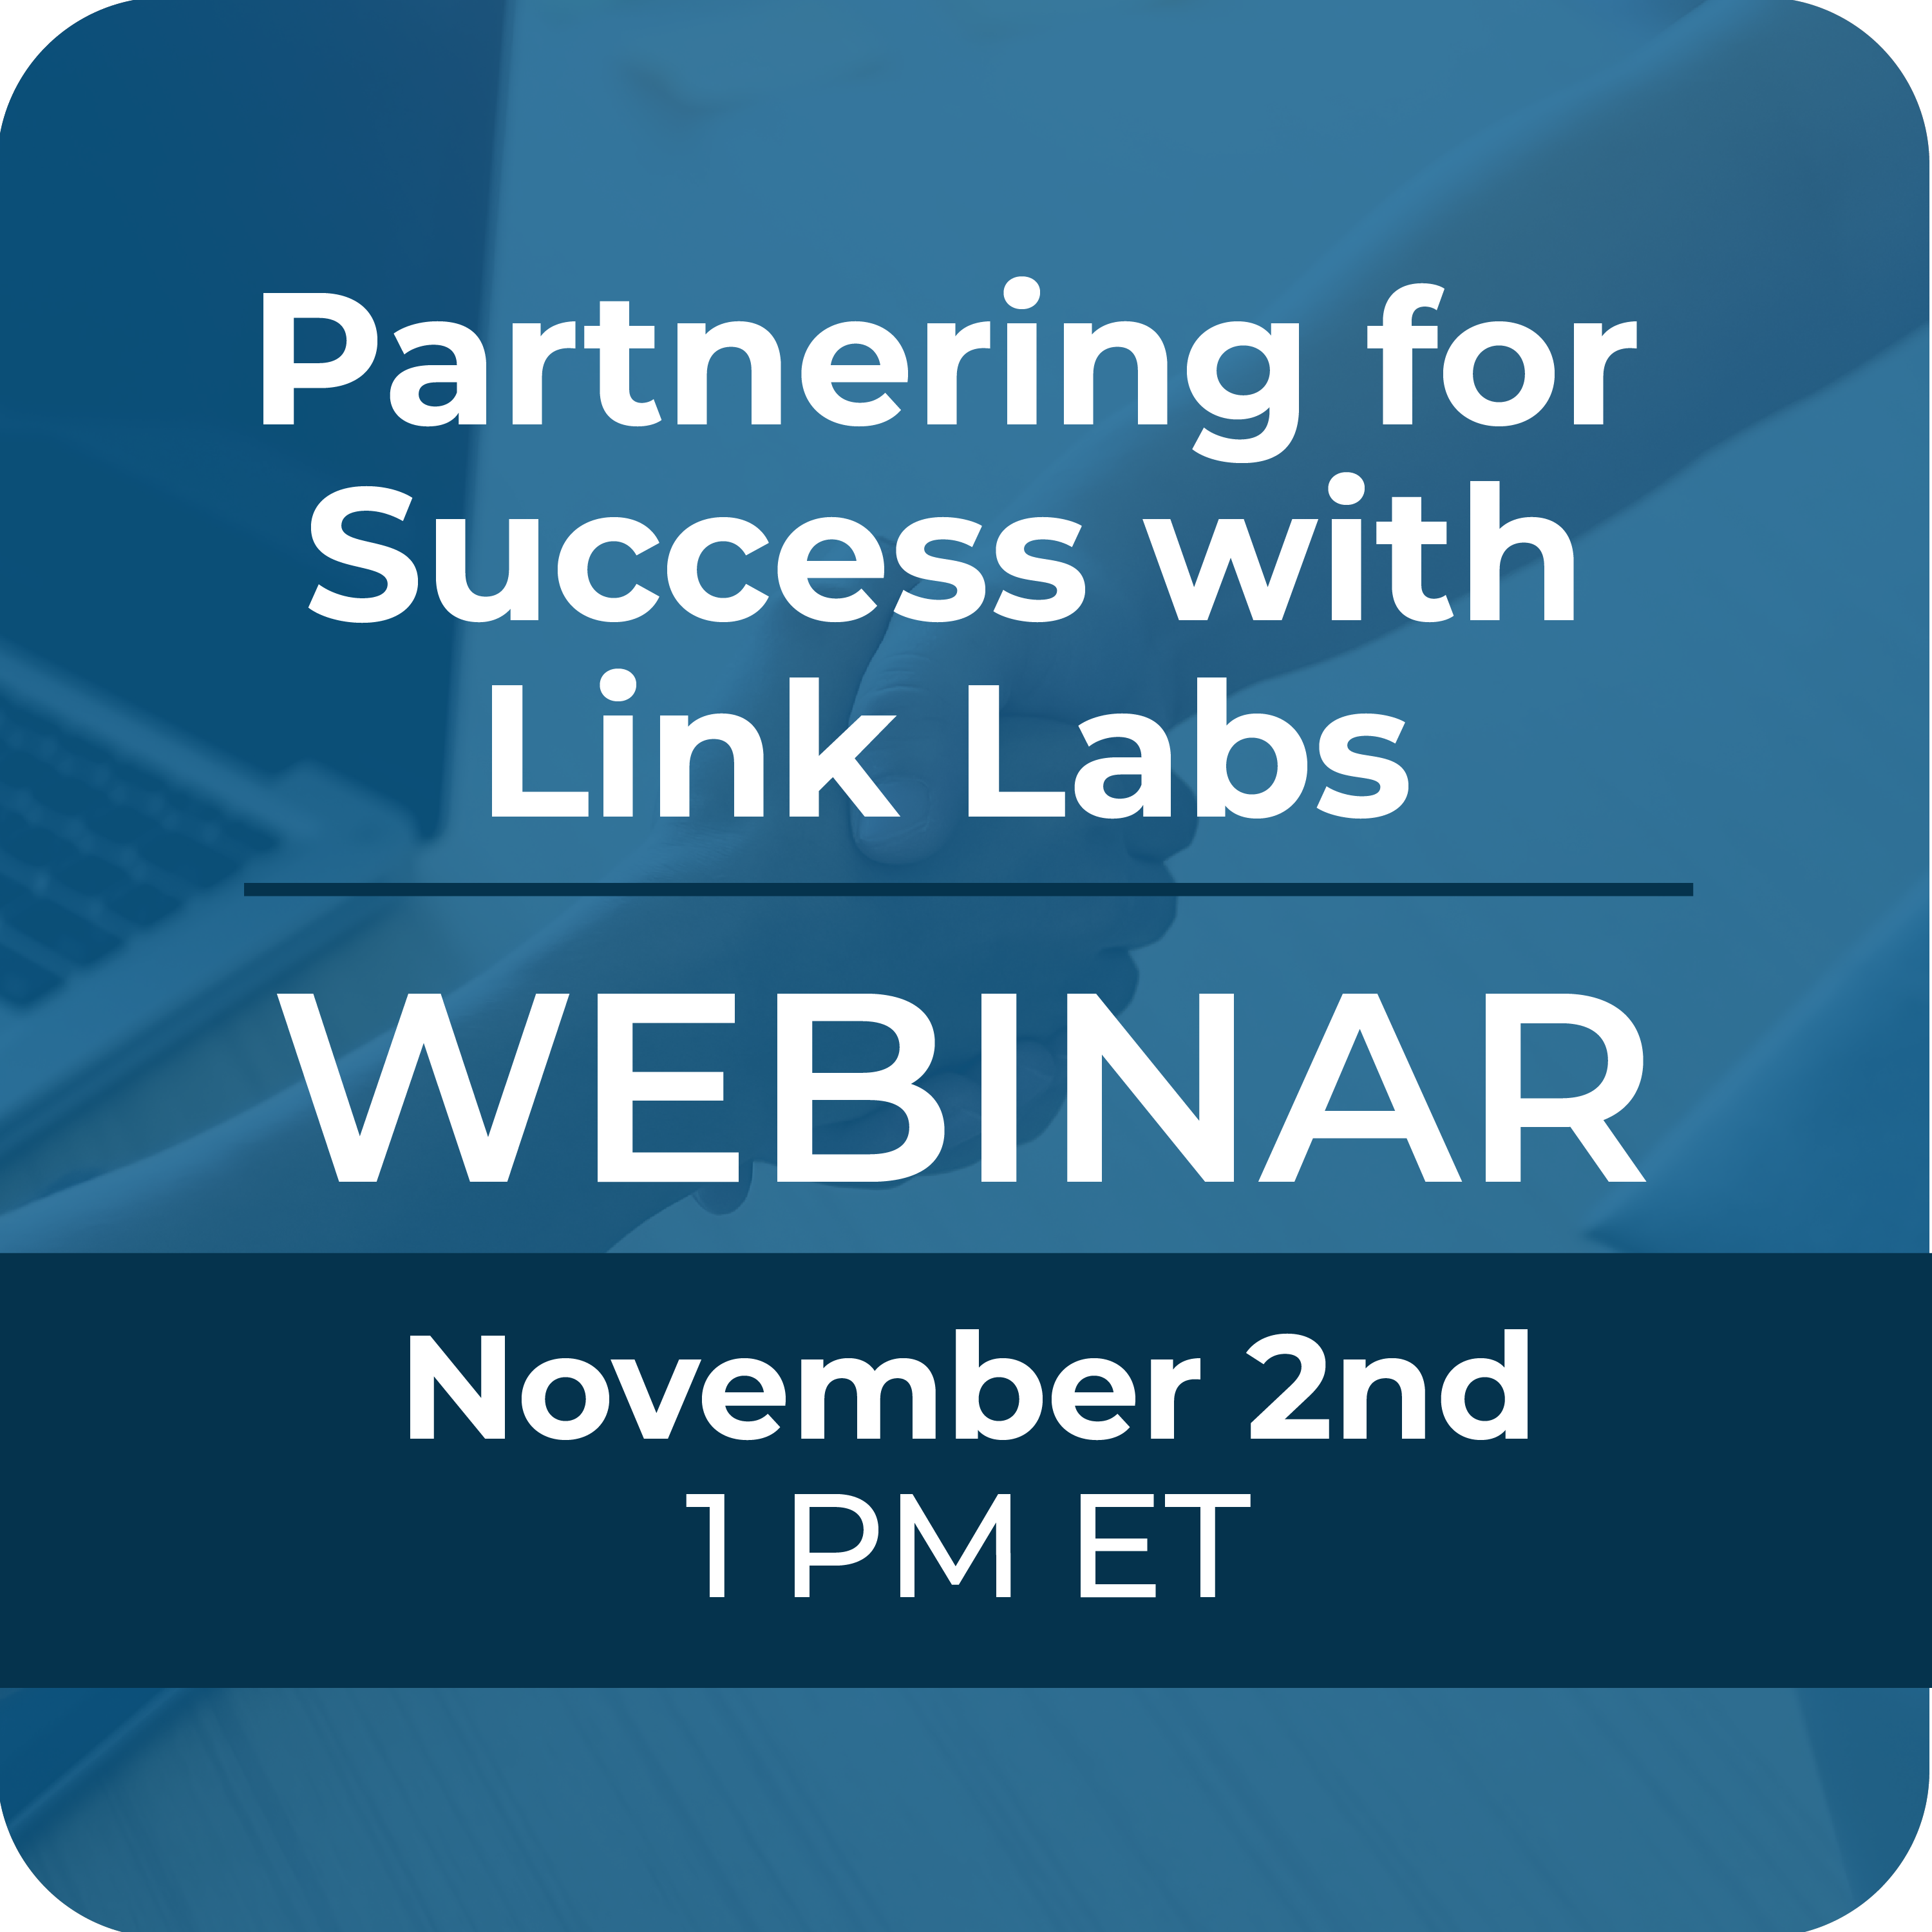 Partnering for Success with Link Labs